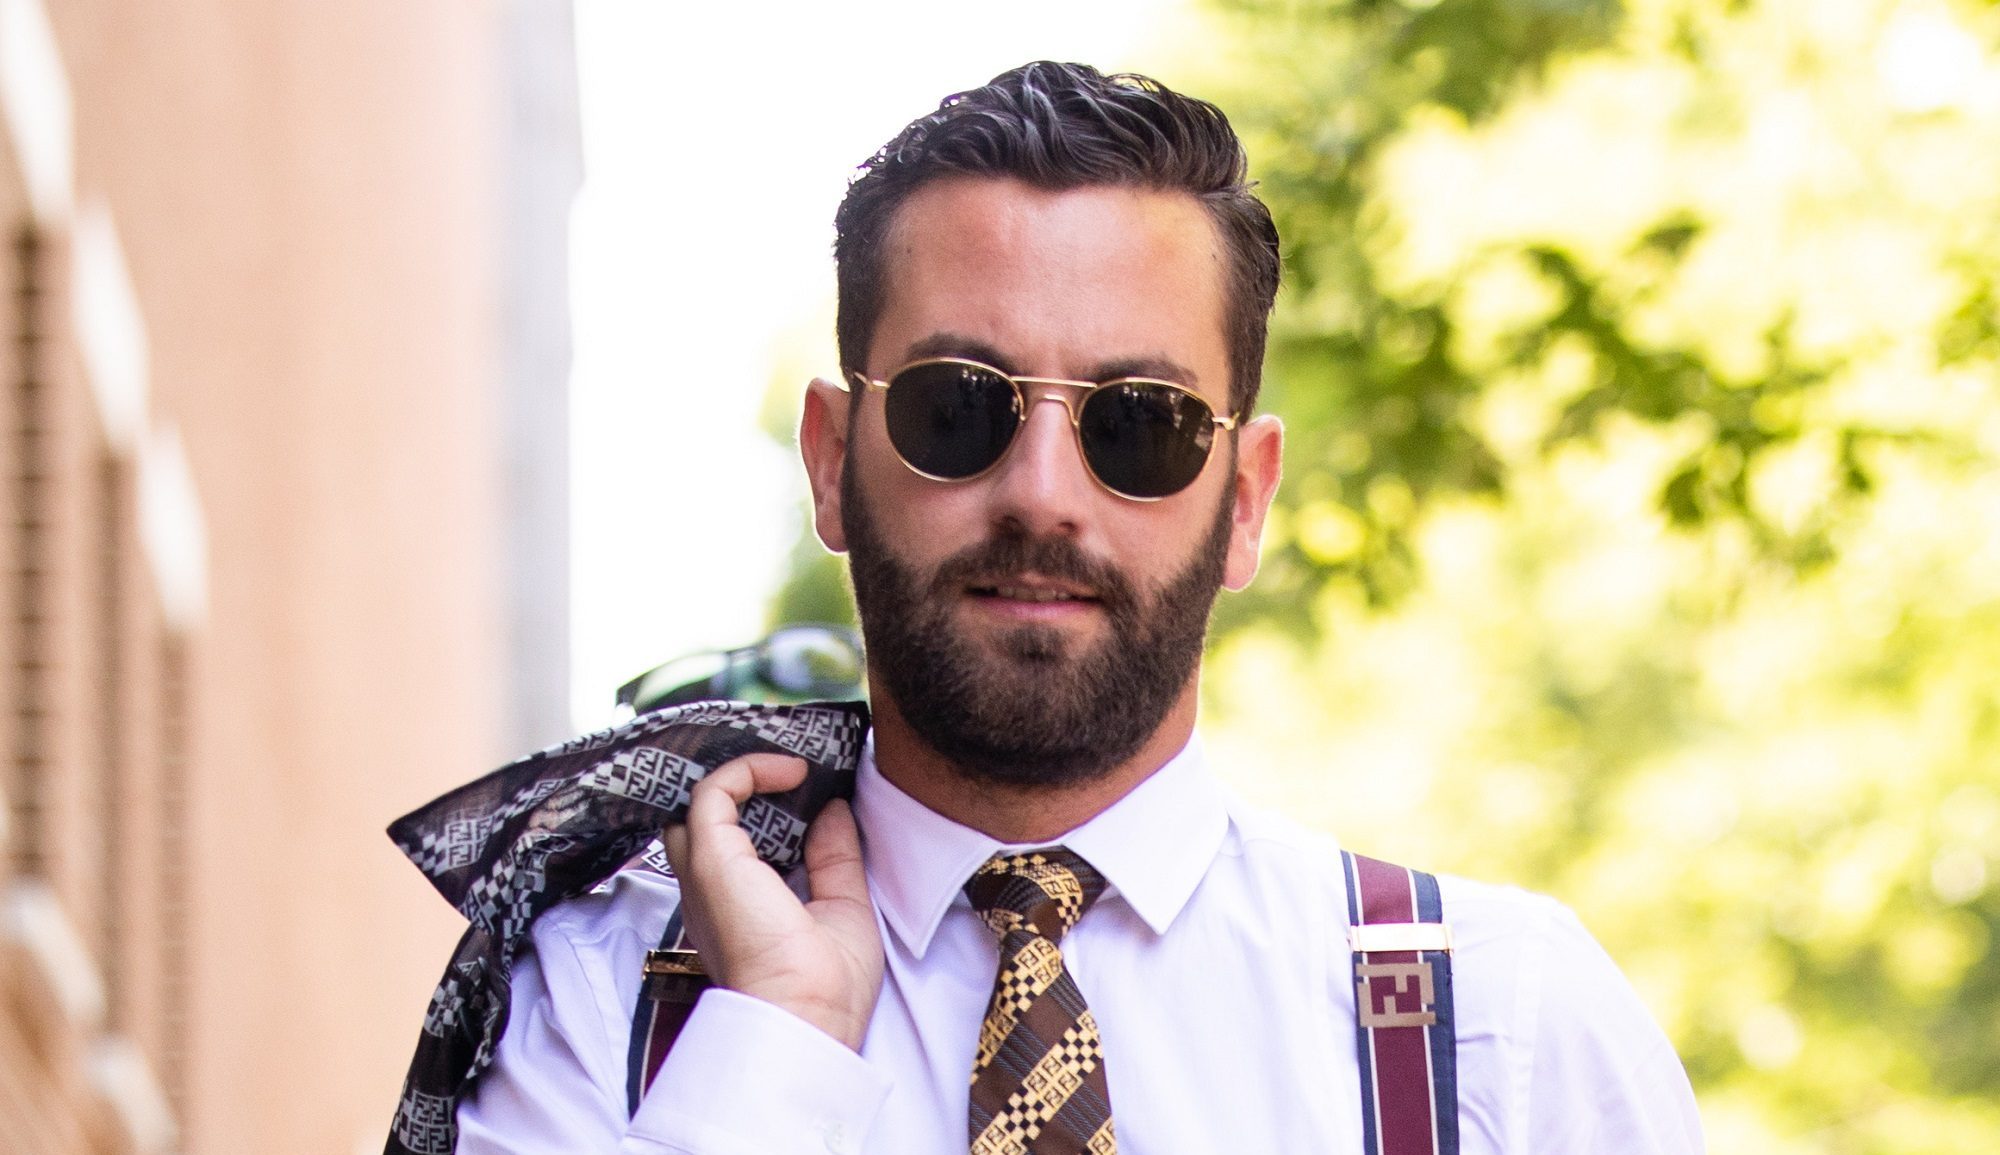 5 facts about beards that every self-respecting bearded man should know